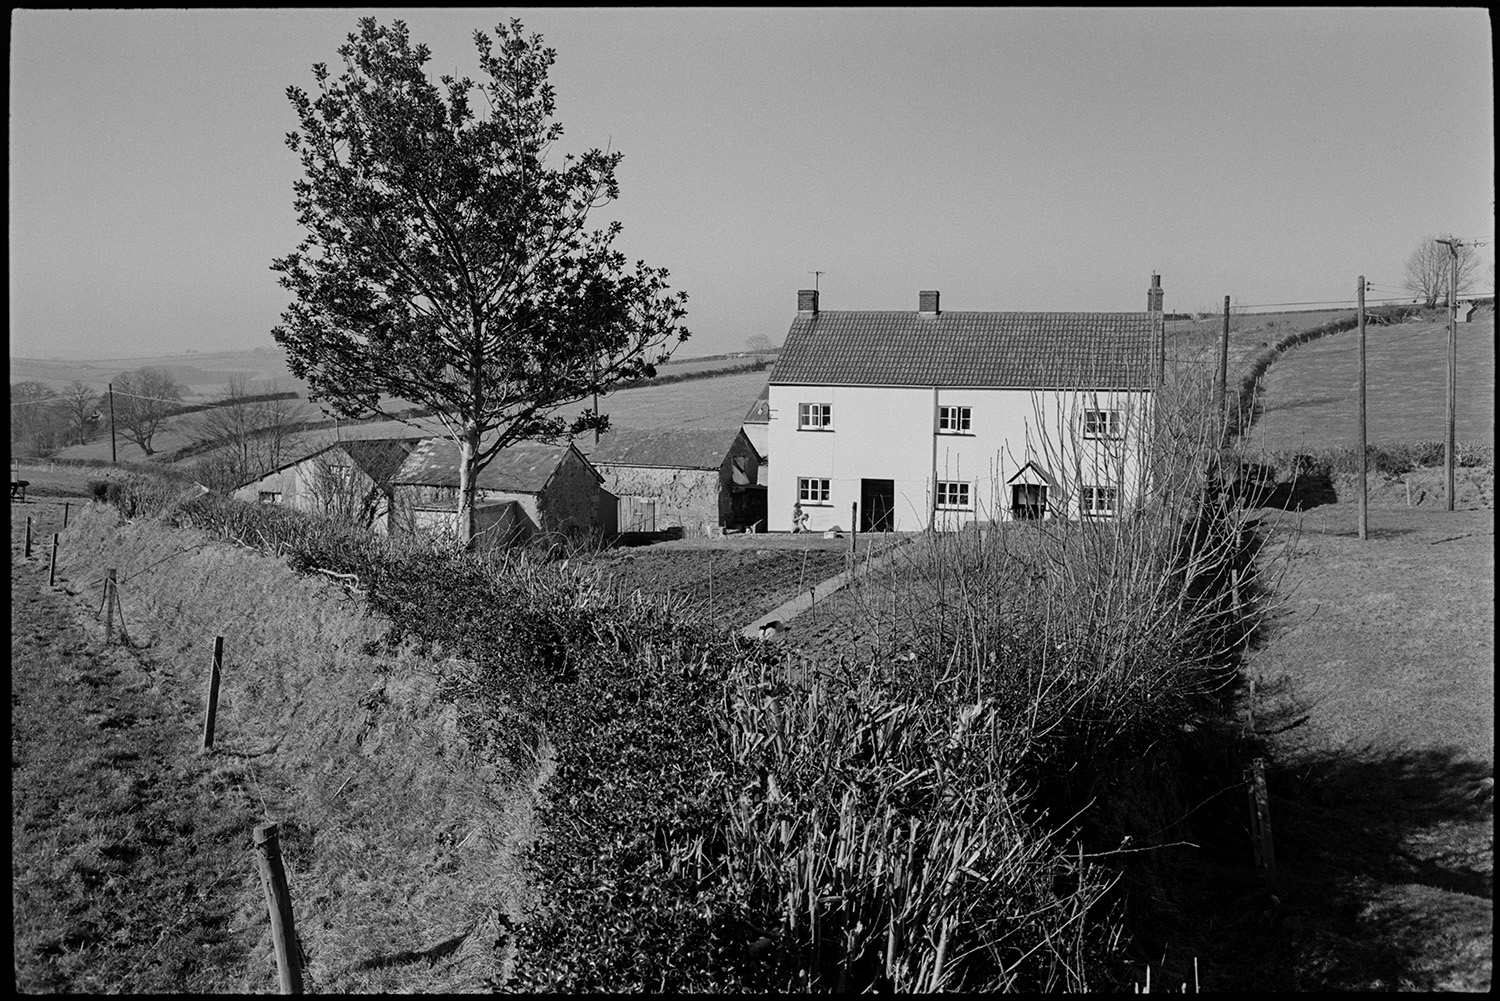 Farmhouse with sheep, farmers wife with lambs in garden. 
[The farmhouse, garden and barns at Jeffrys, Beaford, also known as Mill Road Farm. A landscape with fields and hedgerows can be seen behind the farmhouse.]